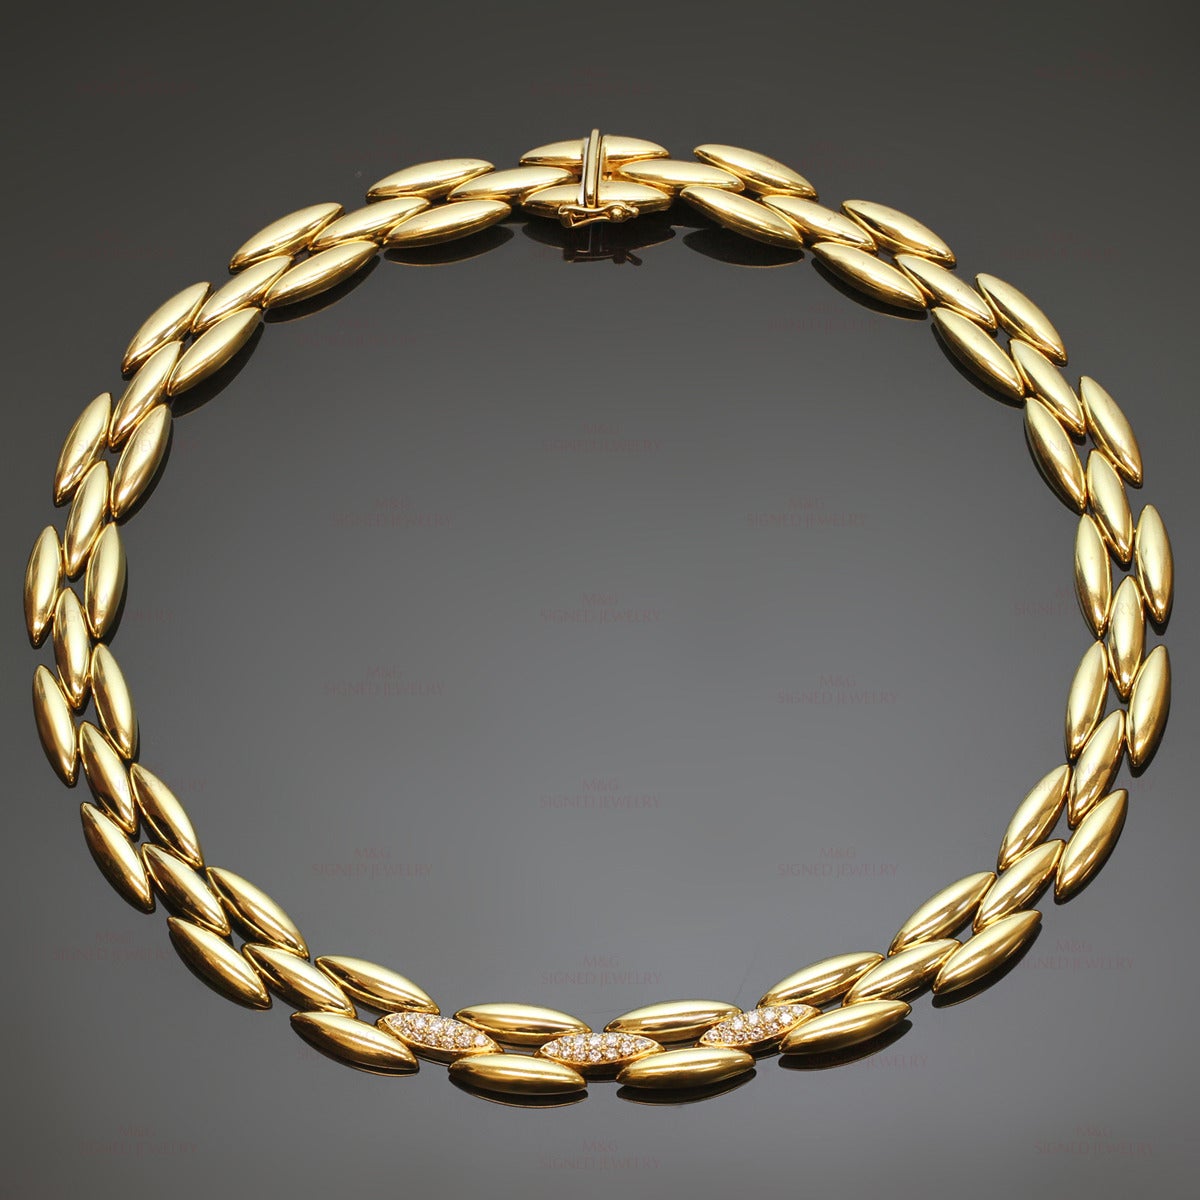 This chic necklace from the iconic Gentiane collection features a fluid almond shape link design made in 18k yellow gold and set with 45 brilliant-cut round E-F VVS1-VVS2 diamonds of an estimated 1.30 carats. Made in France circa 1980s.